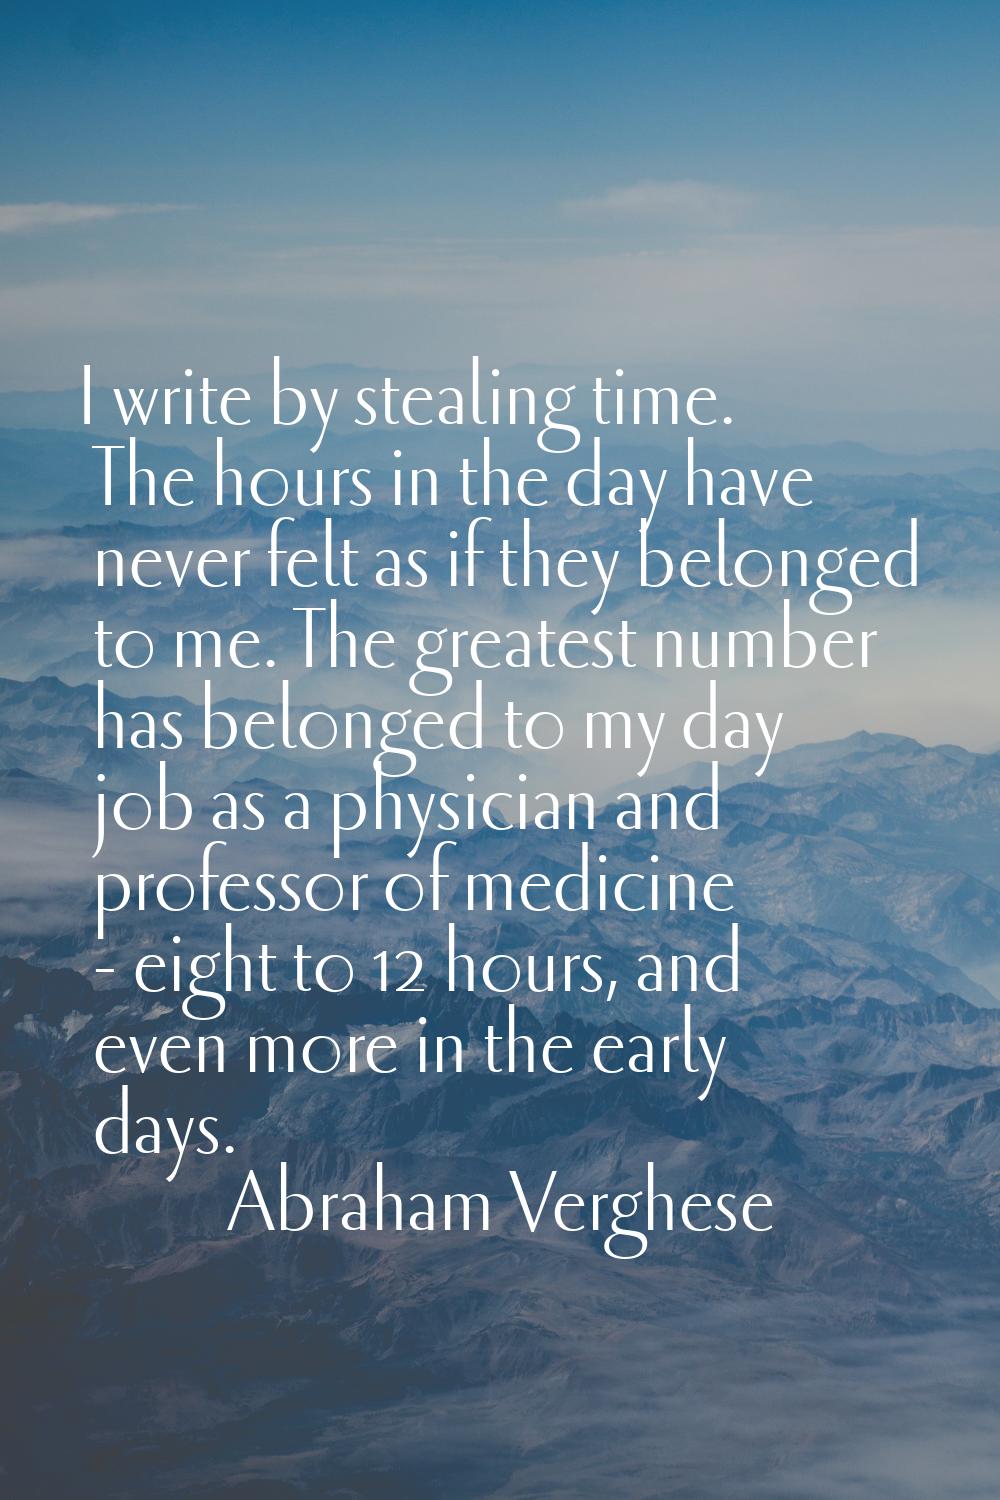 I write by stealing time. The hours in the day have never felt as if they belonged to me. The great